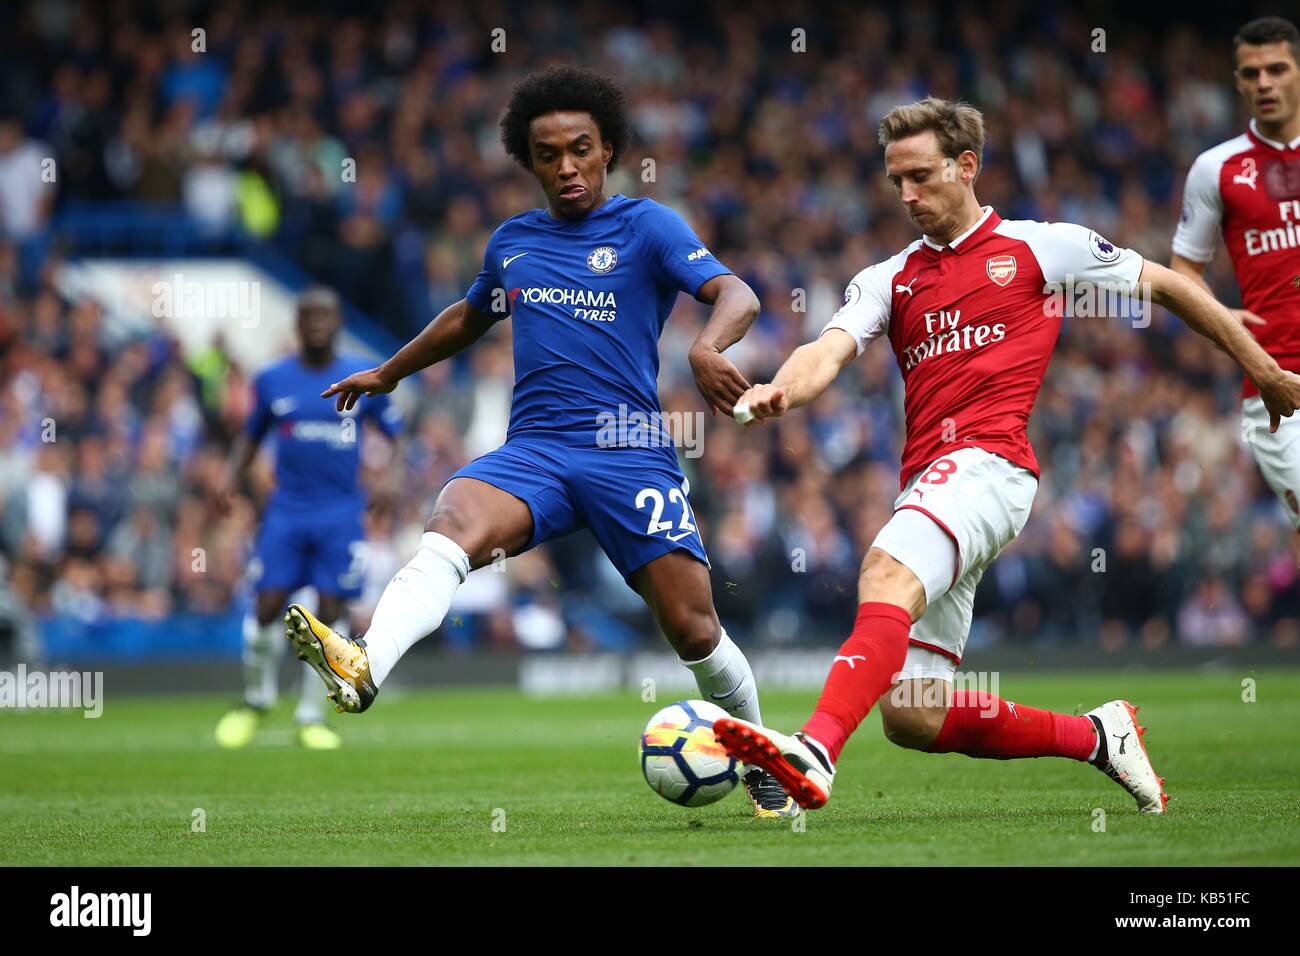 Willian of Chelsea and Nacho Monreal of Arsenal during the Premier League match between Chelsea and Arsenal at Stamford Bridge in London. 17 Sep 2017 Stock Photo